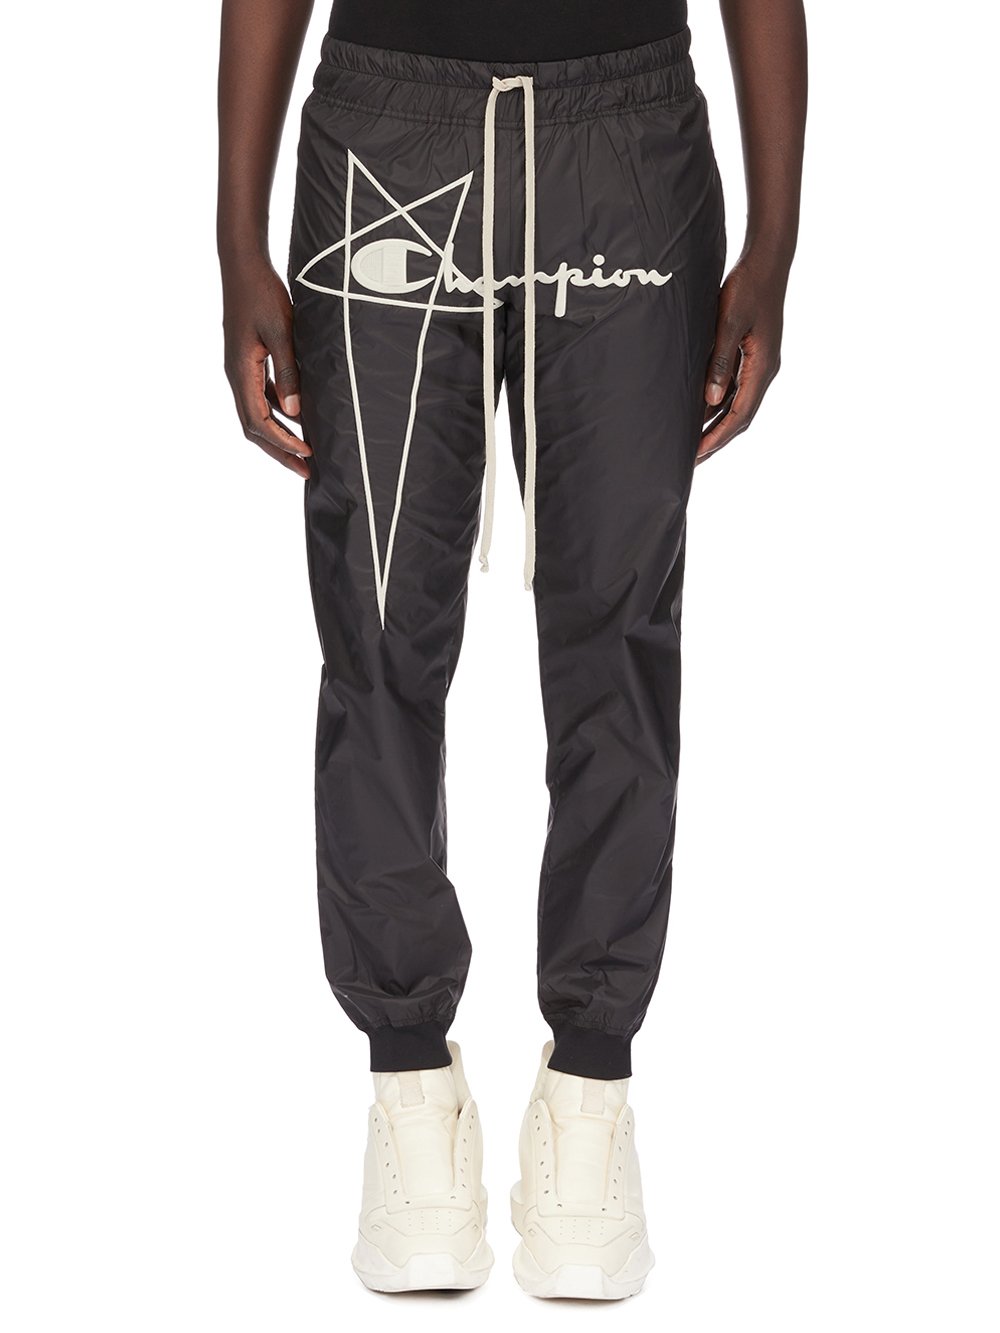 CHAMPION X RICK OWENS JOGGERS IN BLACK RECYCLED NYLON